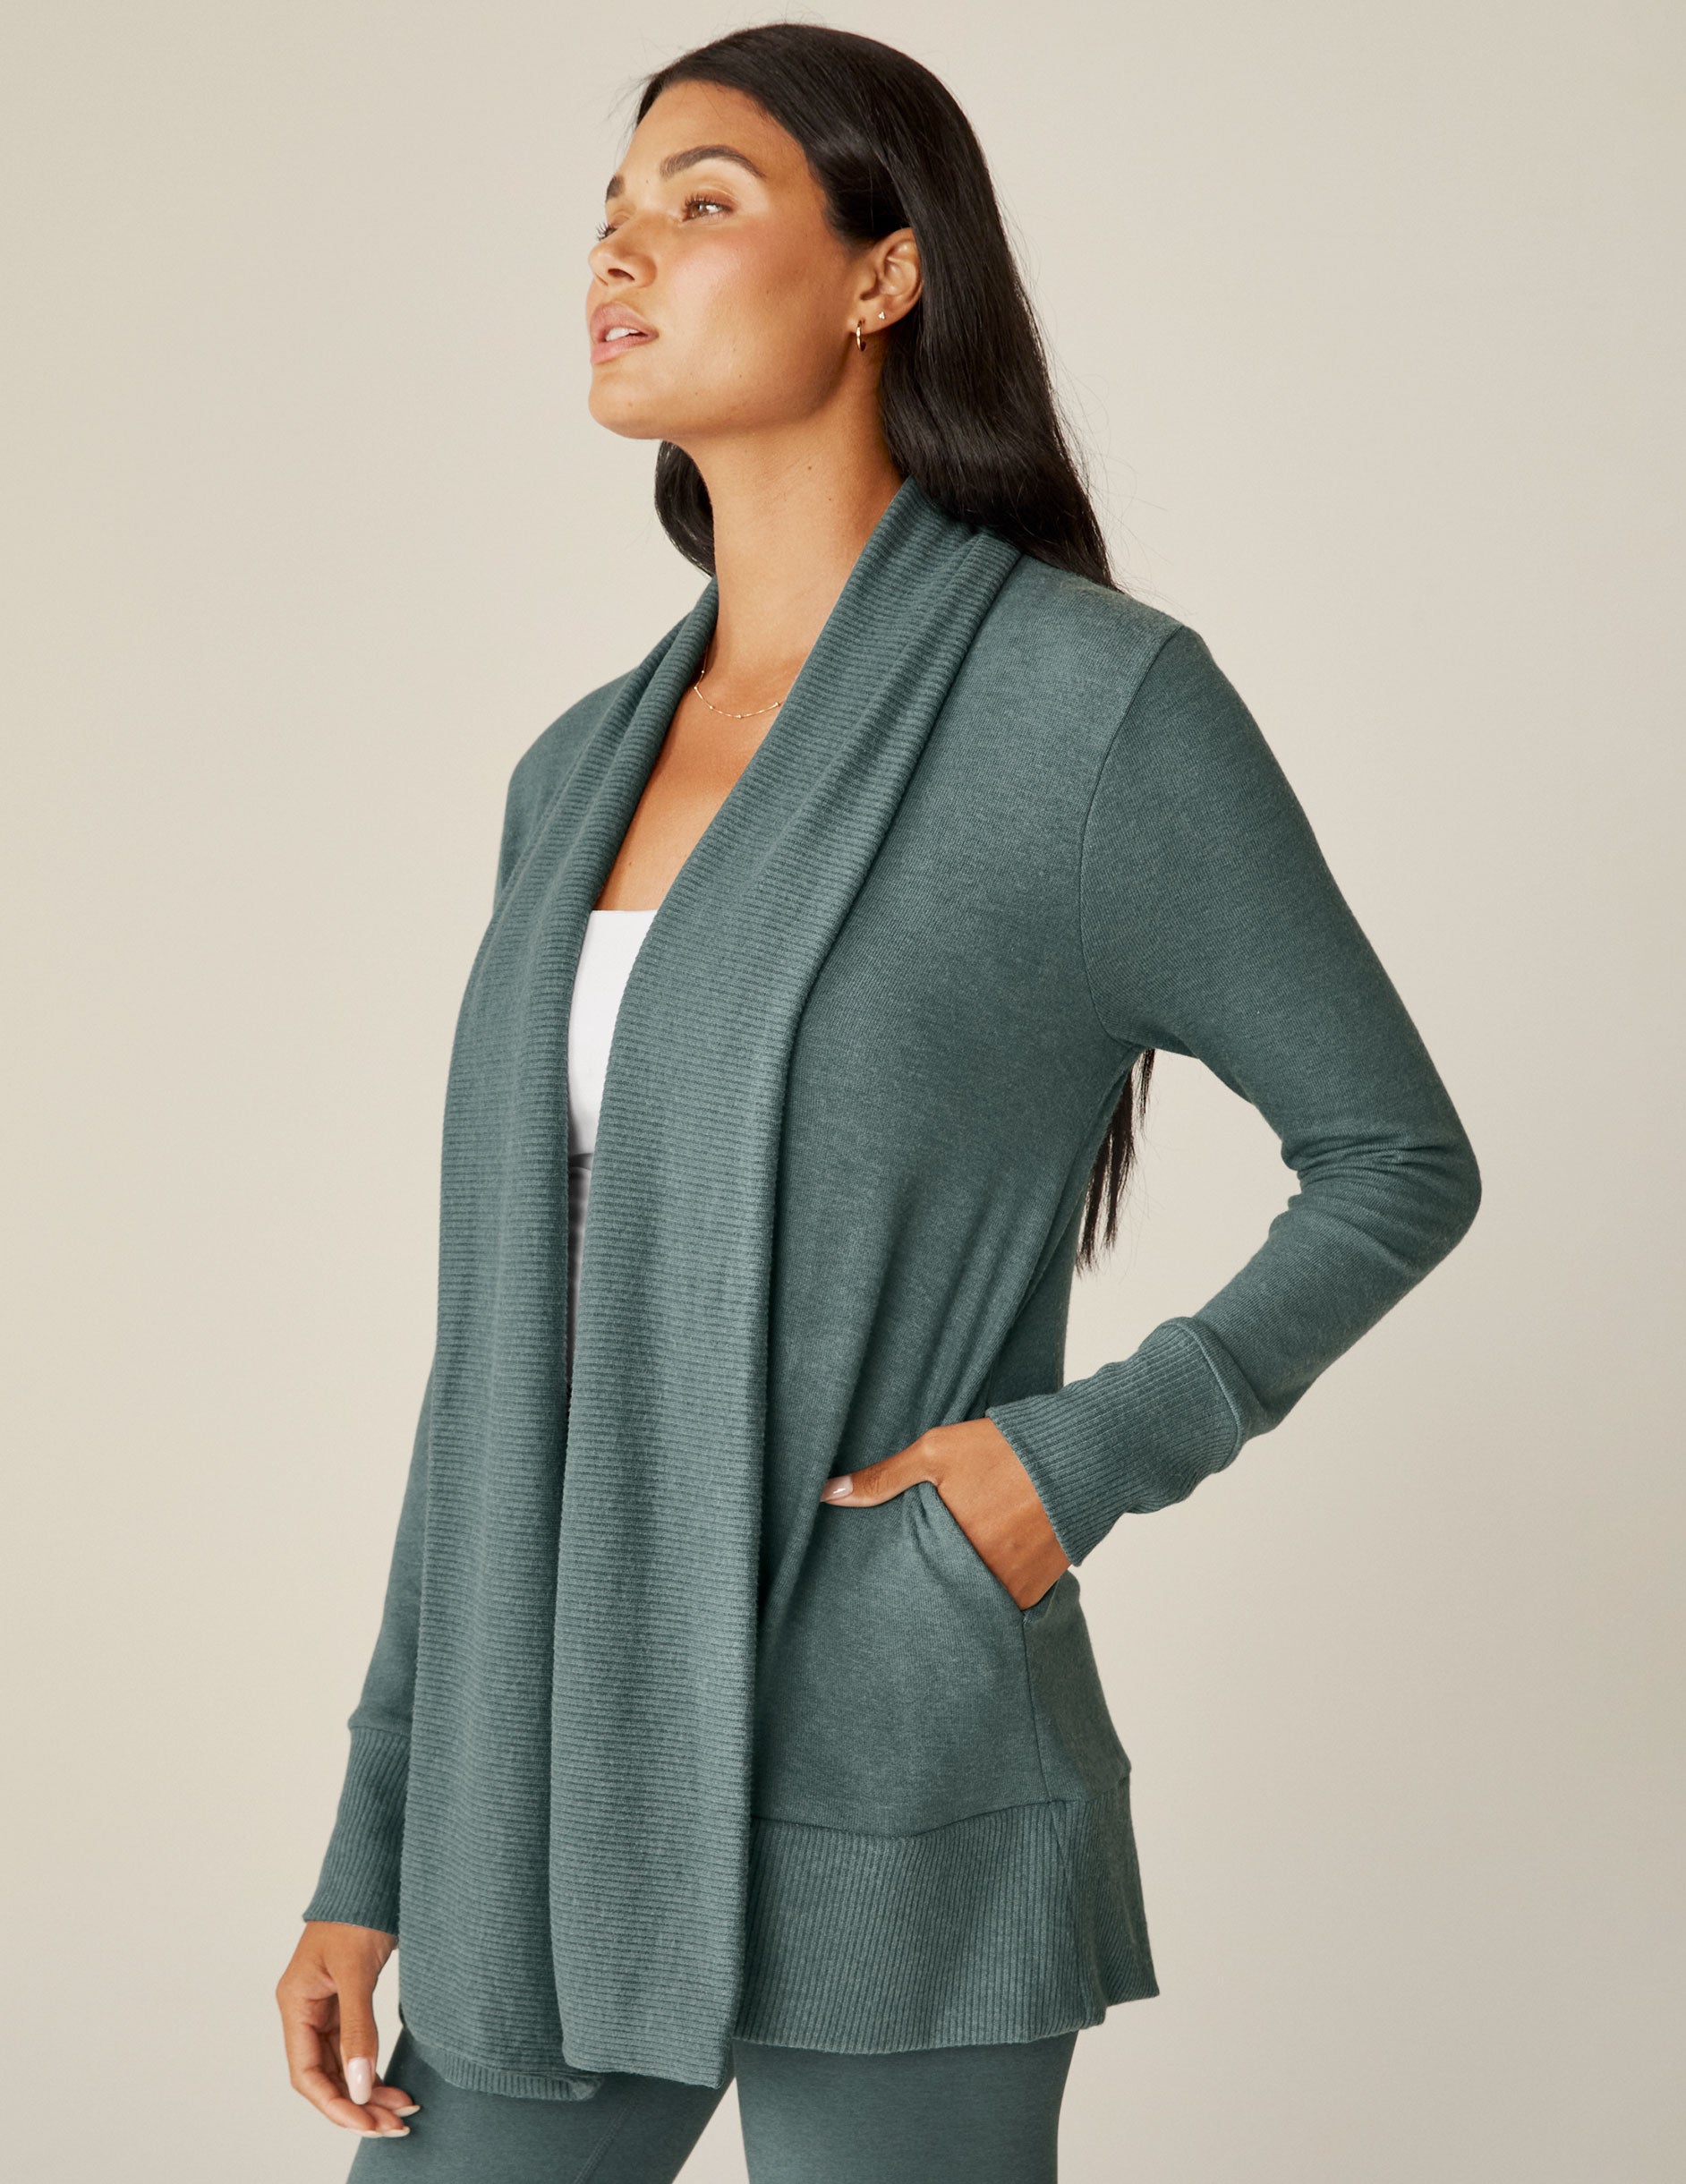 blue open front cardigan with thumbholes at the cuffs. 